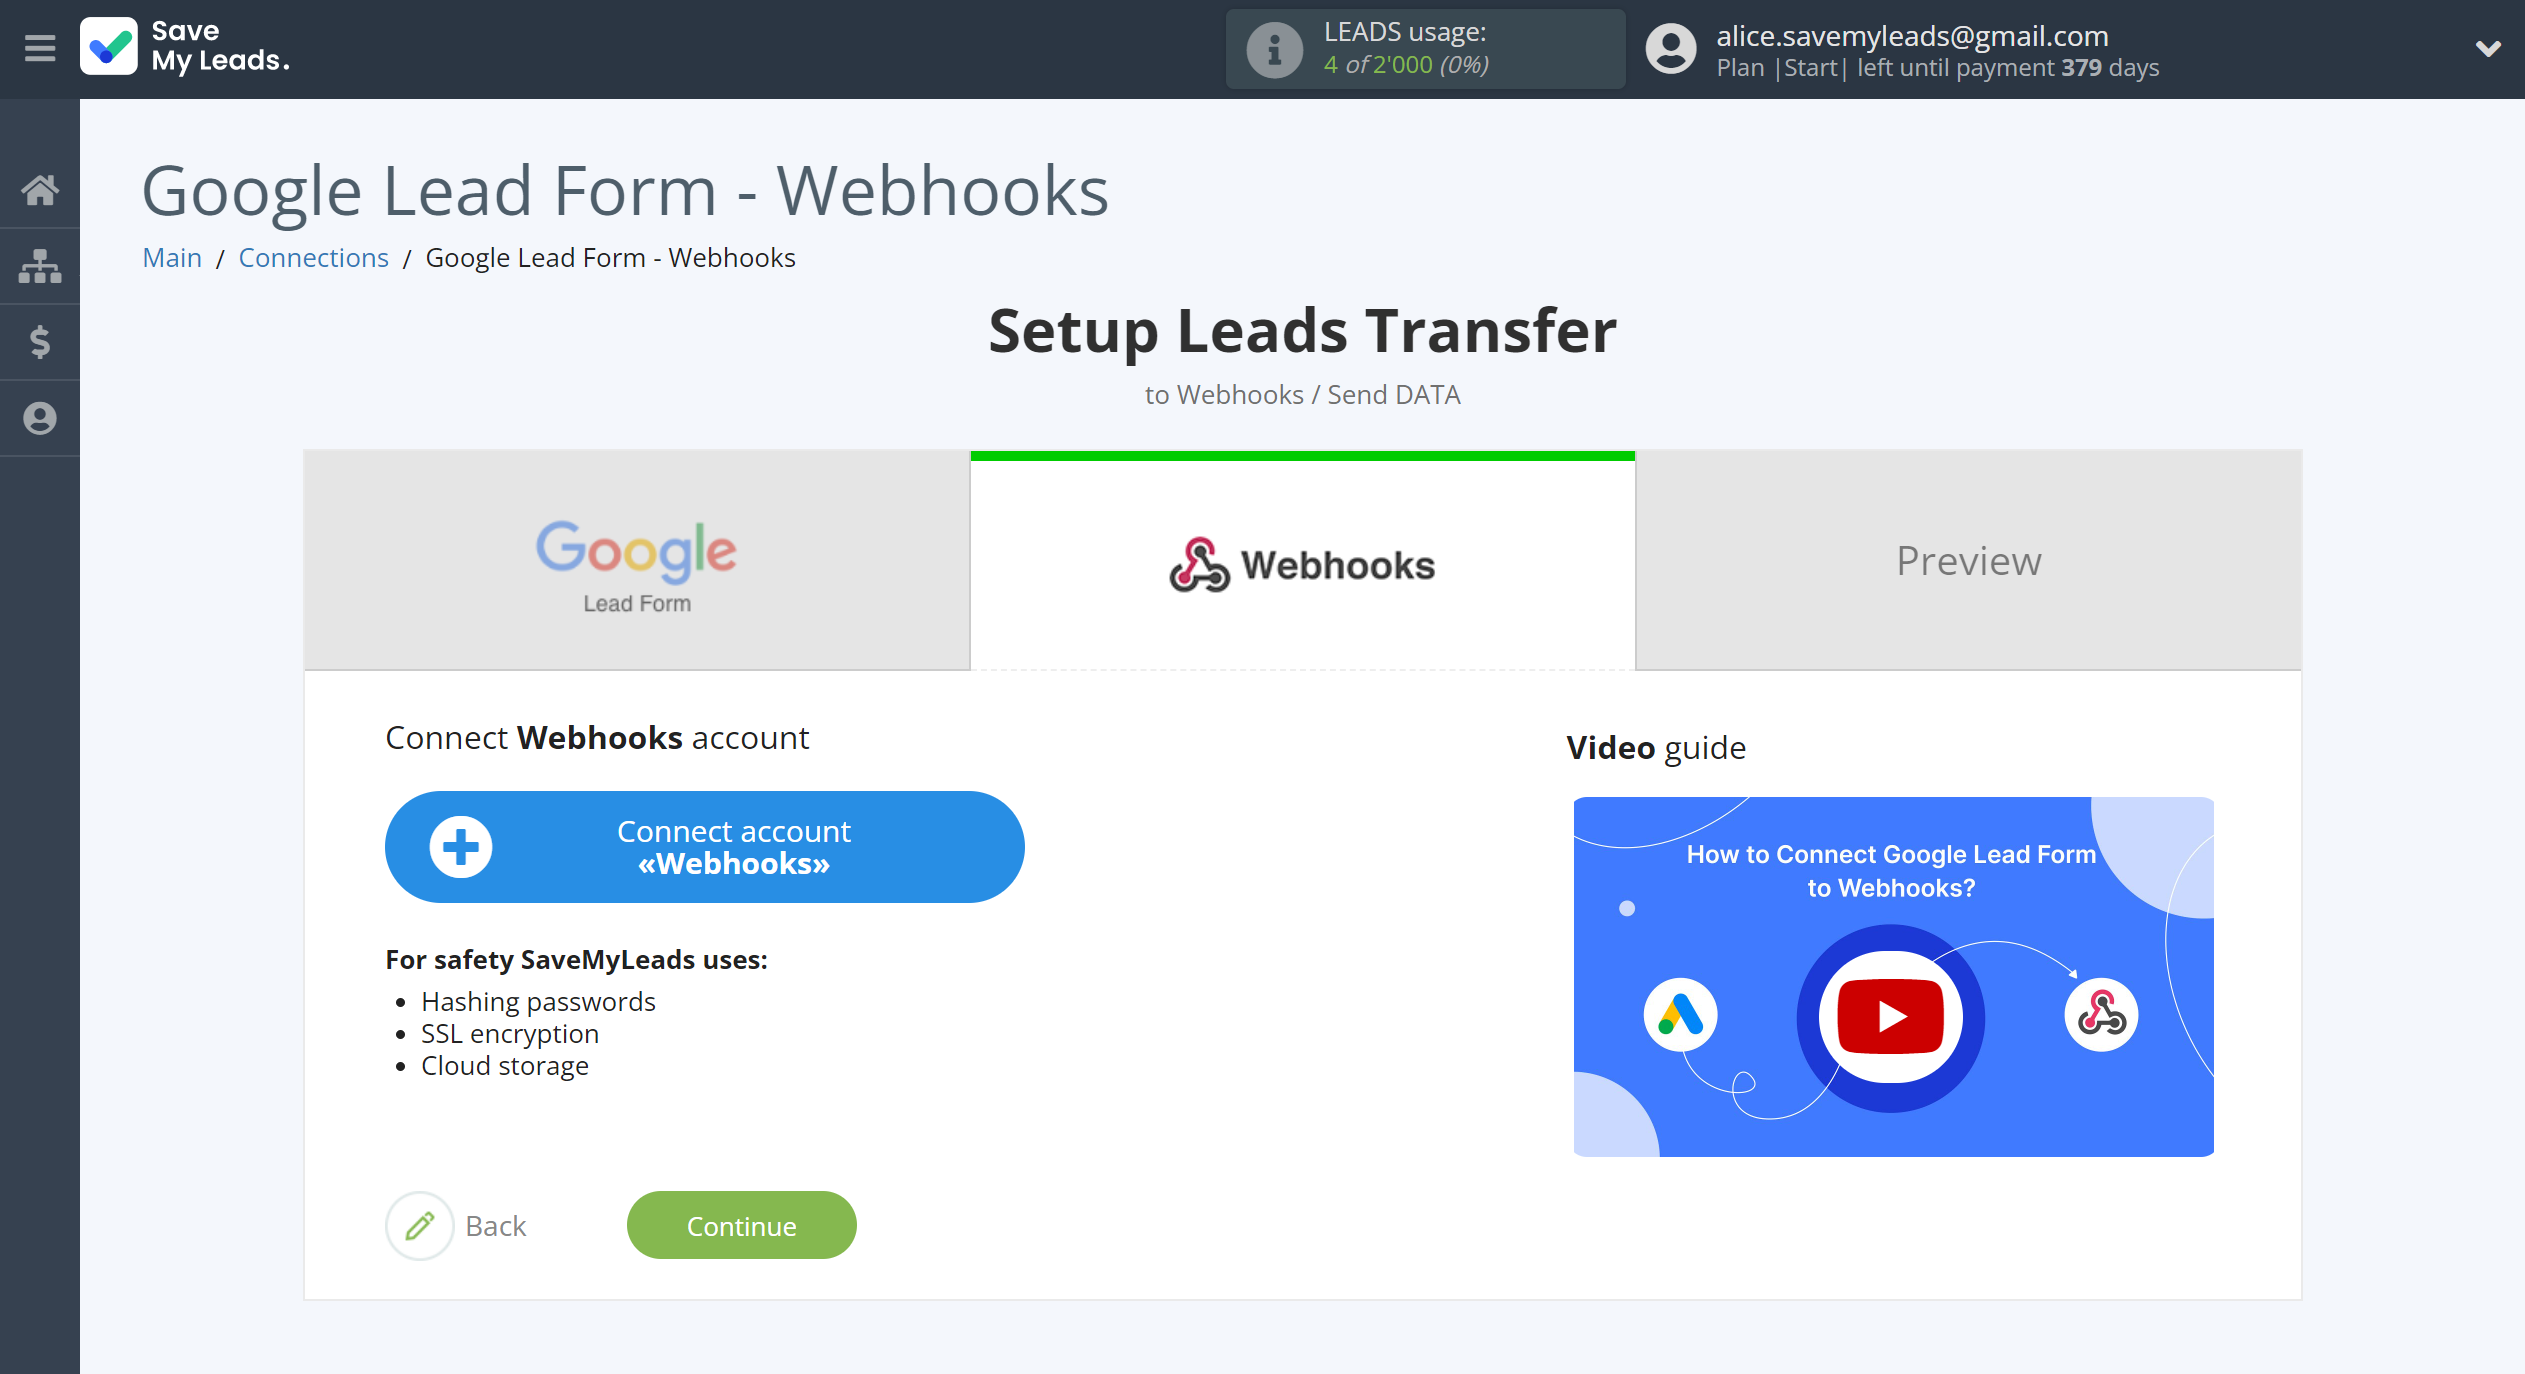 How to Connect Google Lead Form with Webhooks | Data Destination account connection